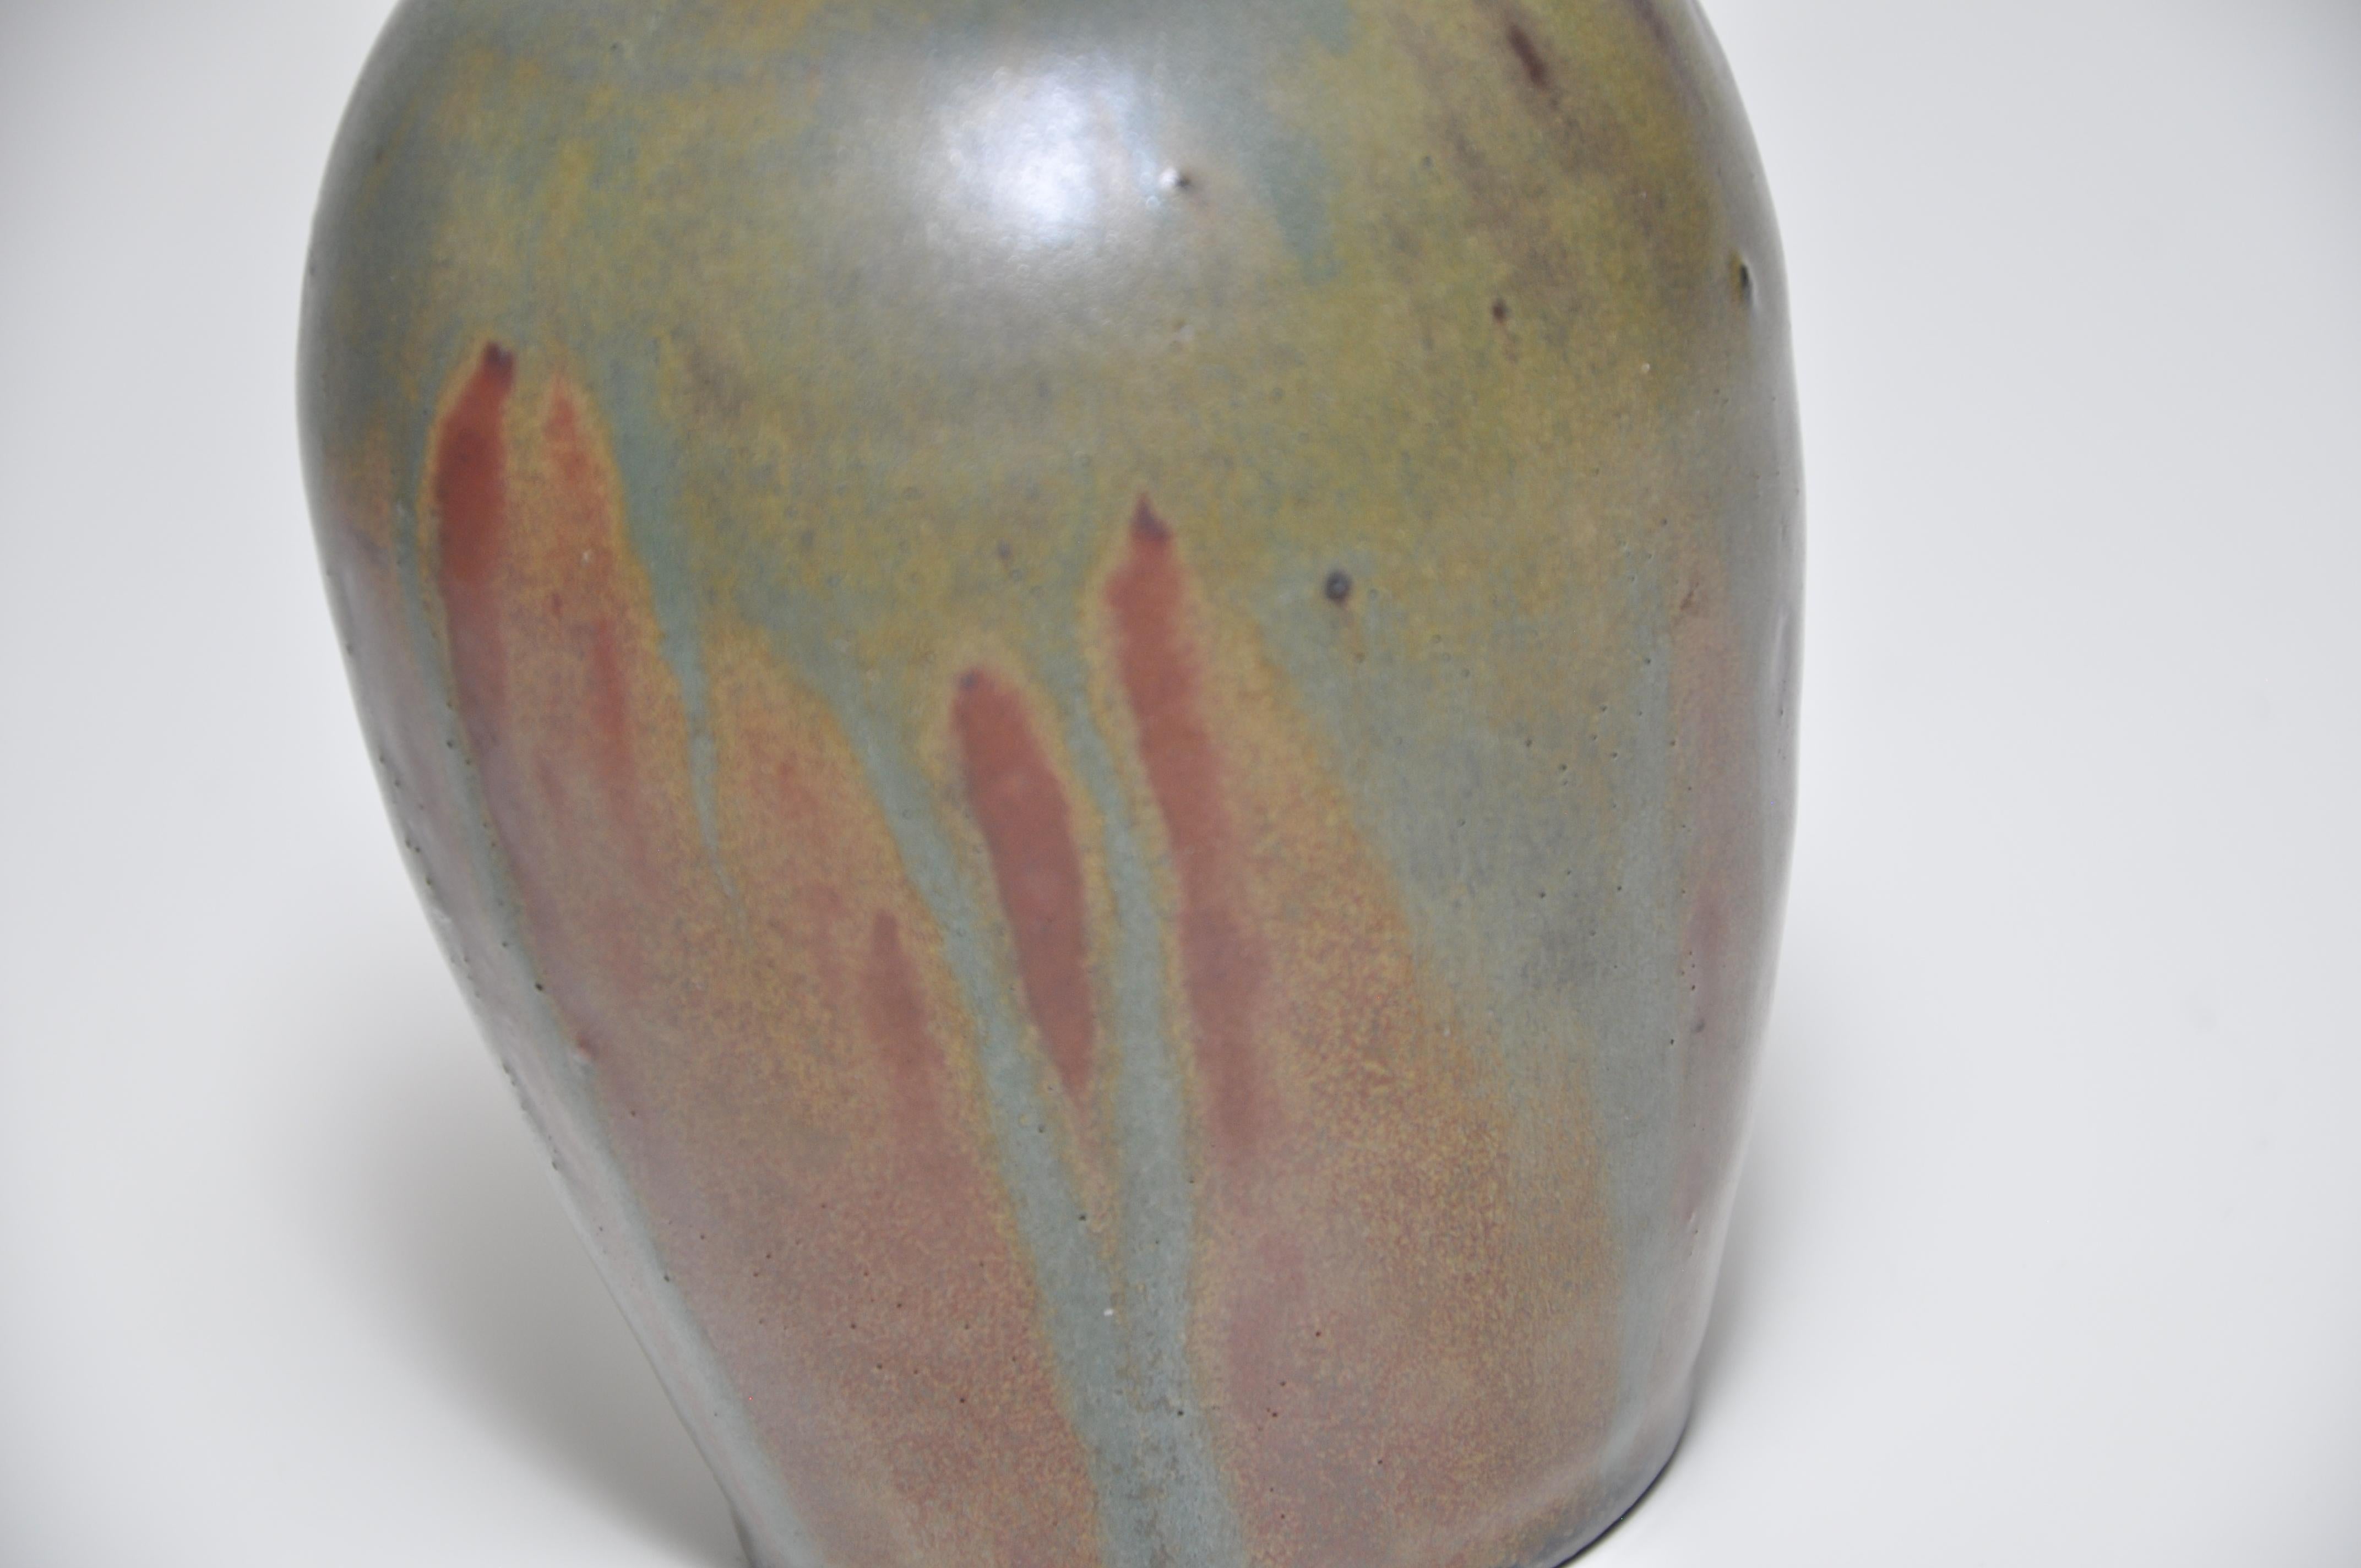 French Art Nouveau ceramic vase, of ovoid form with narrow neck, covered with flowing dark green and brown glaze of Japanese inspiration.
A very nice and subtle piece.
With the incised signature of Lucien Arnaud, a close friend of celebrated Jean